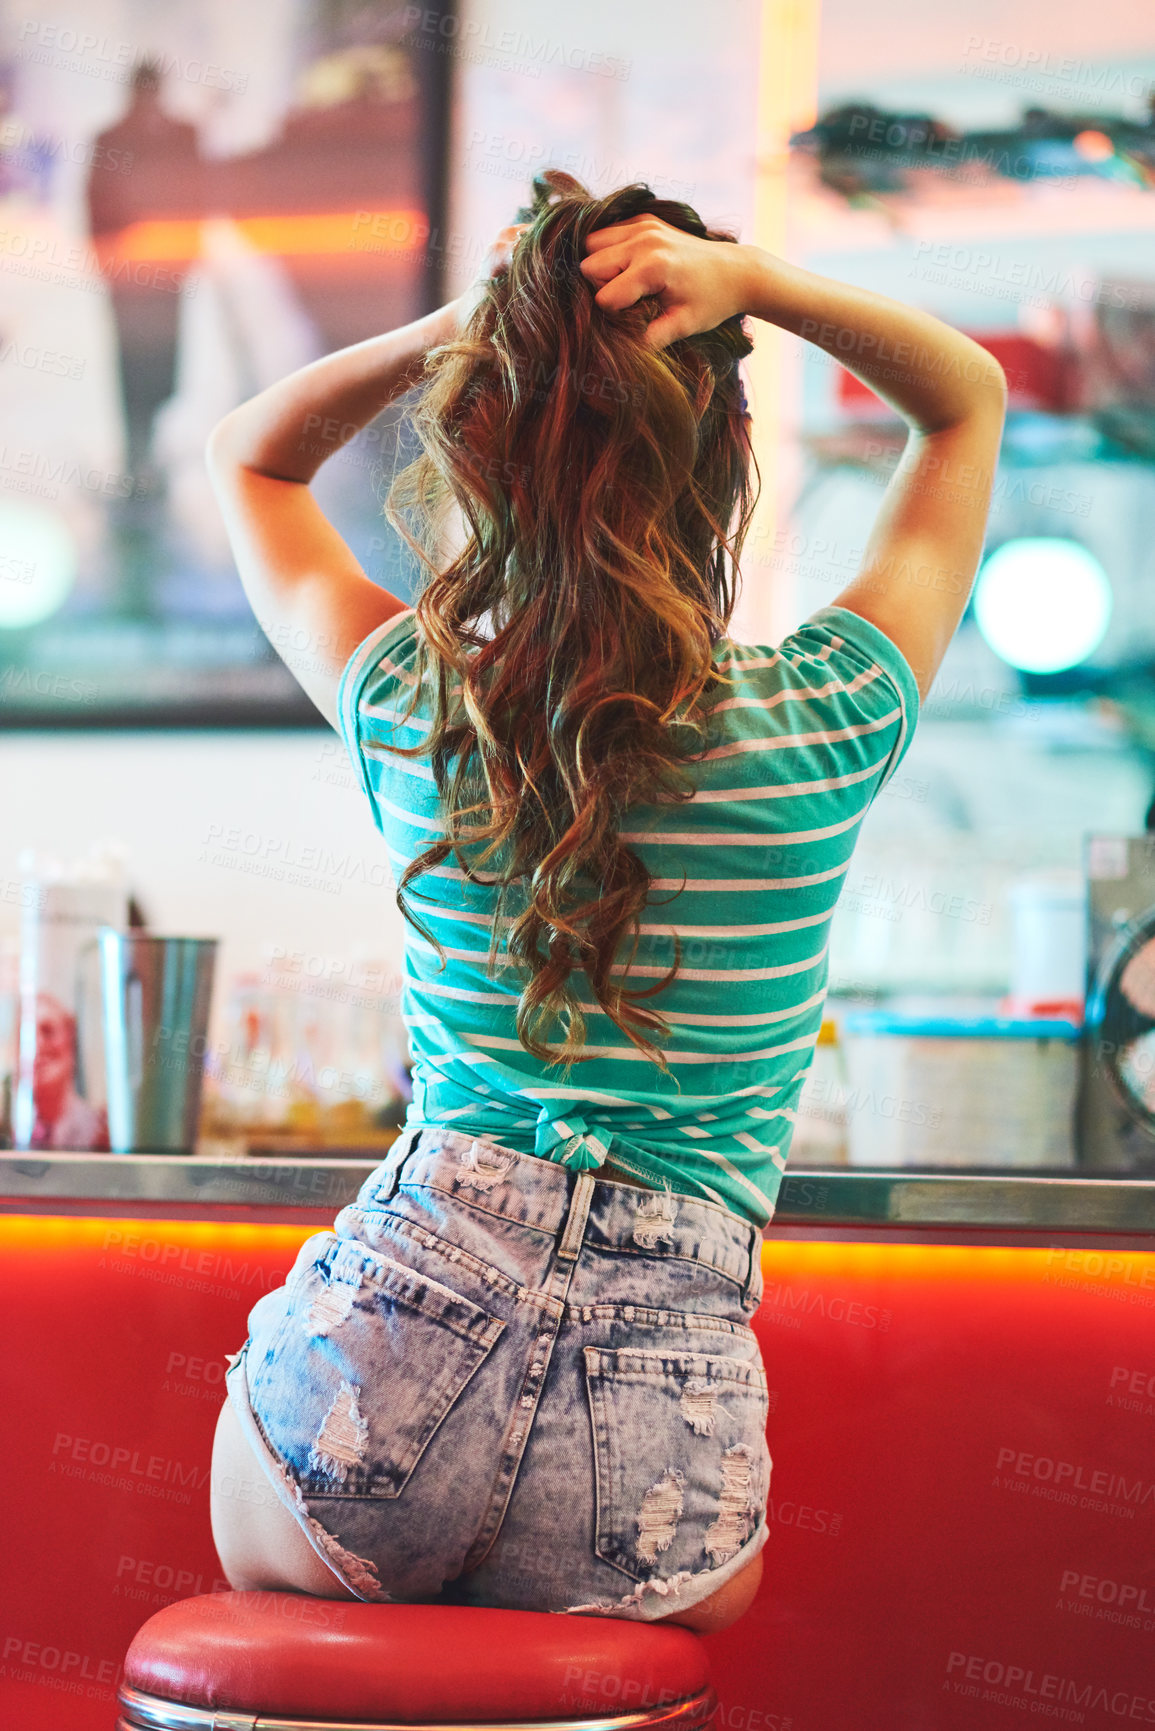 Buy stock photo Rearview shot of an unrecognizable woman holding her hair up in a diner